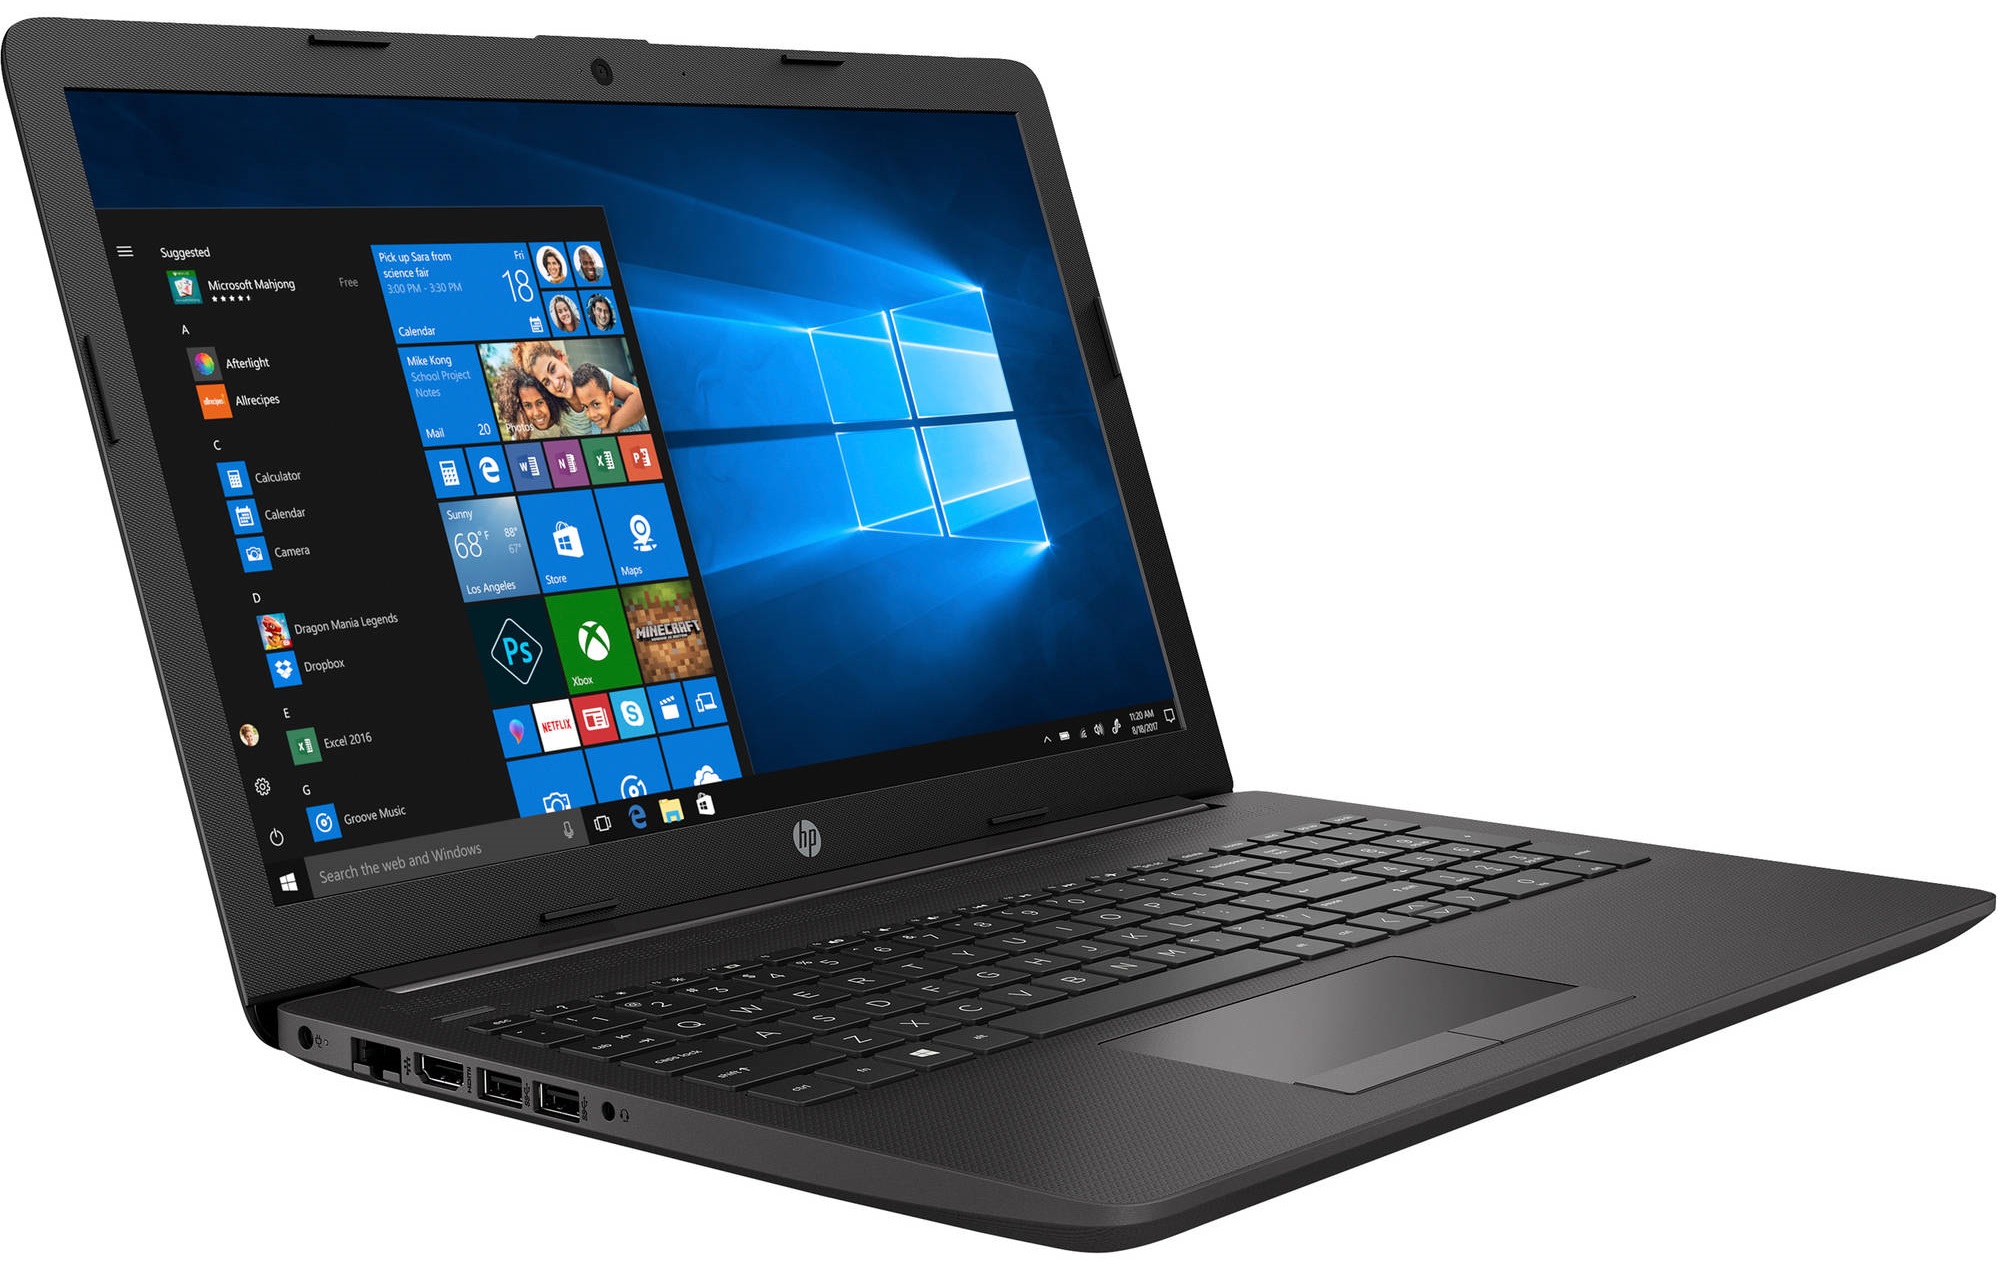 HP 250 G7 / 255 G7 - Specs, Tests, and Prices | LaptopMedia.com